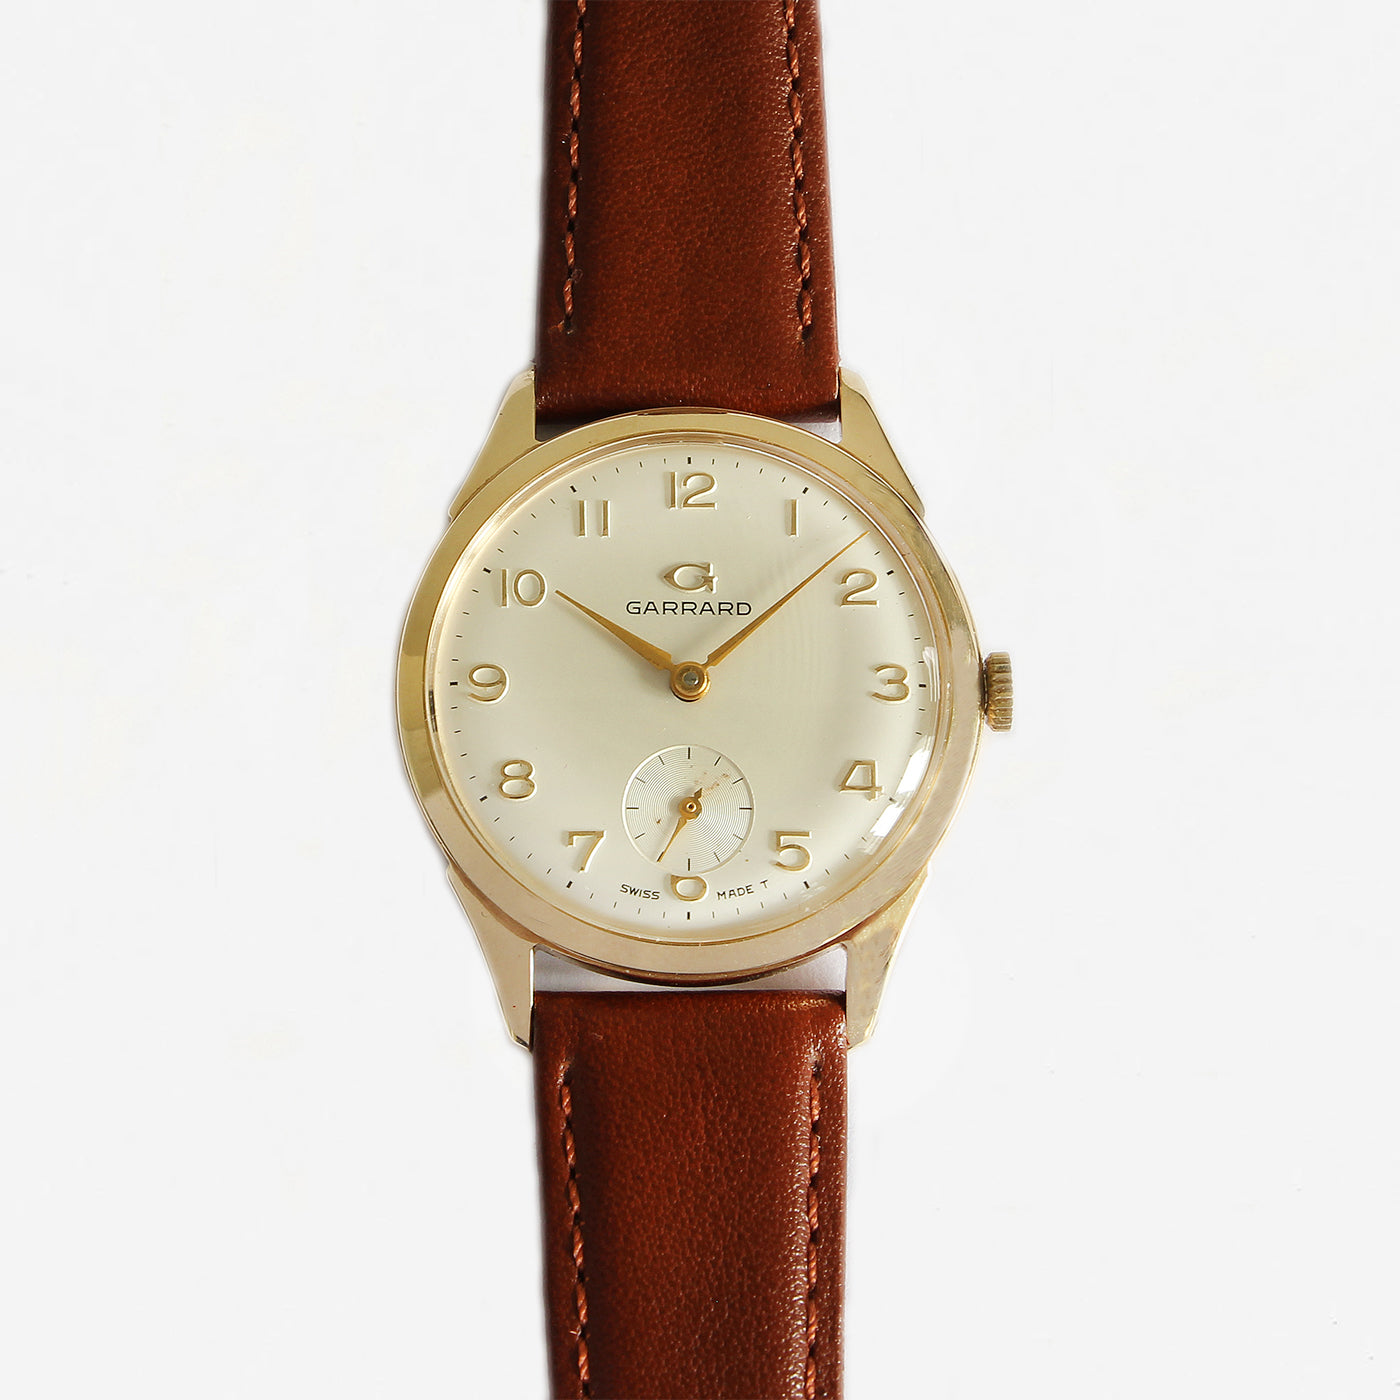 a garrard secondhand vintage watch with gold case and leather strap